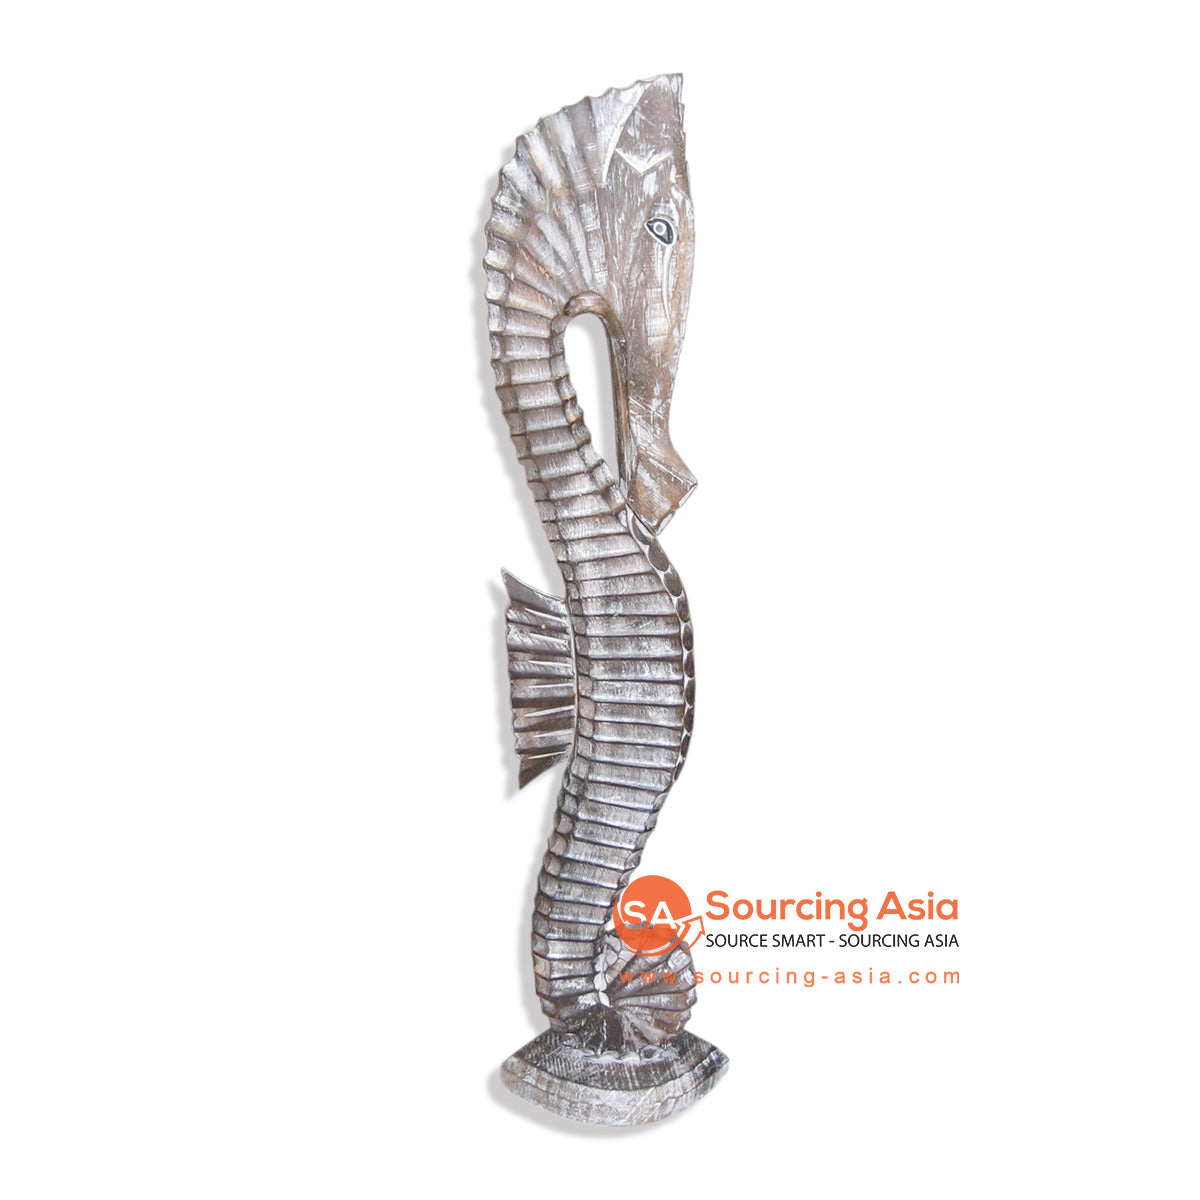 SKB001DB100 NATURAL DARK BROWN AND LIGHT WHITE WASH WOODEN SEA HORSE STATUE